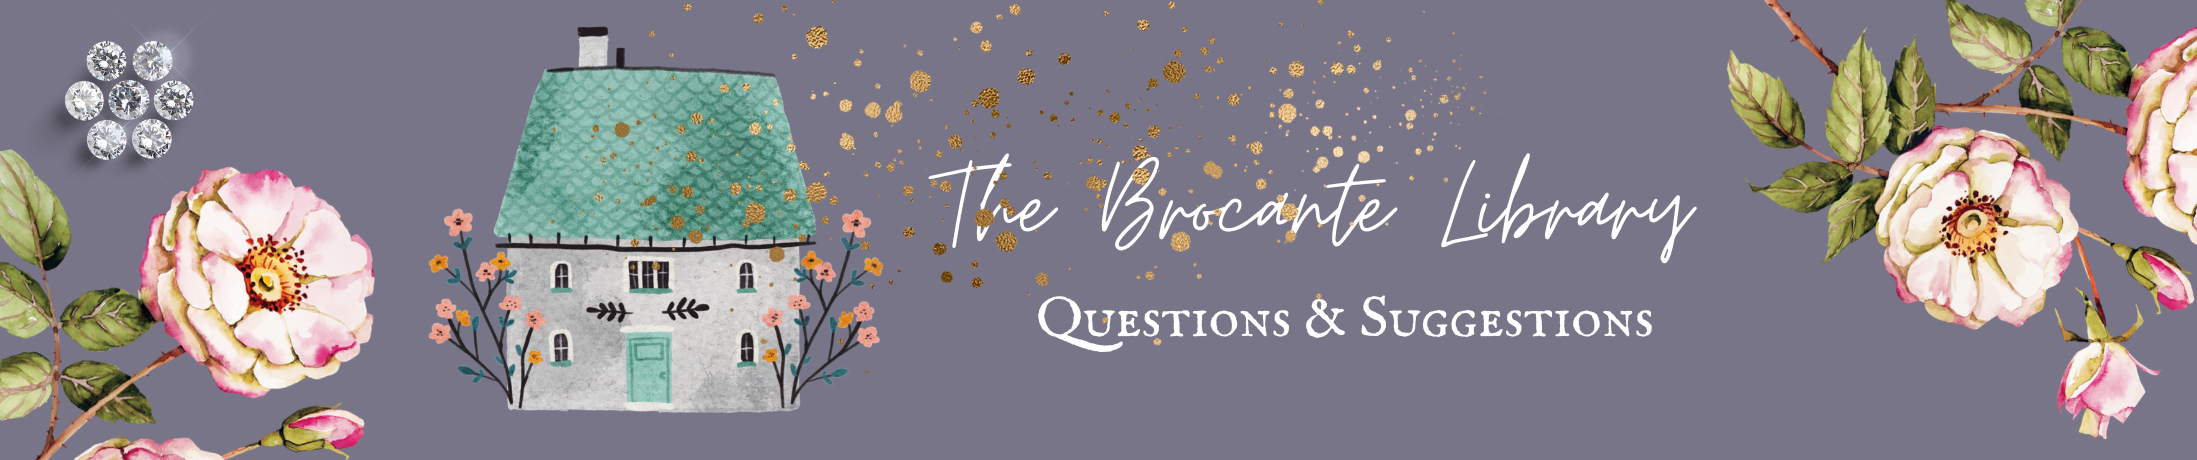 #ASK - Questions & Suggestions | Brocante Library